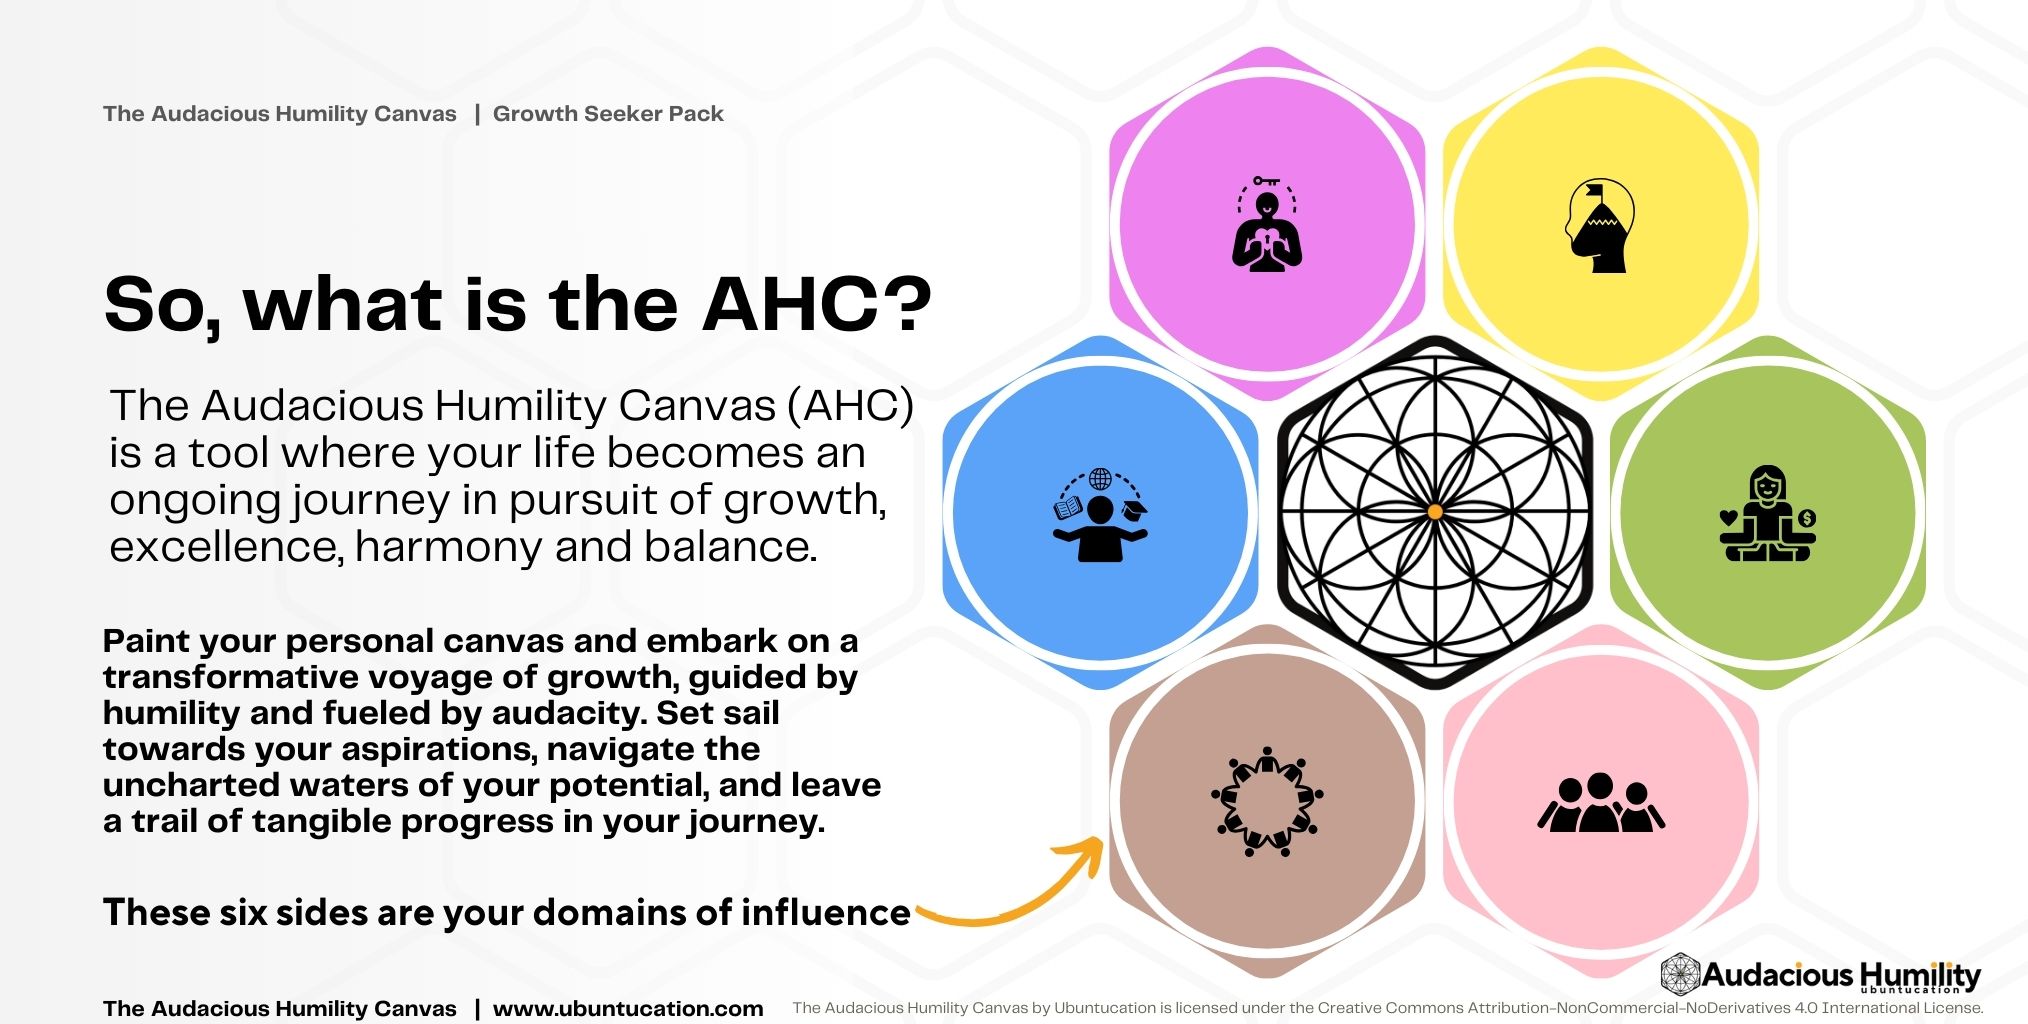 The Audacious Humility Canvas - What is it